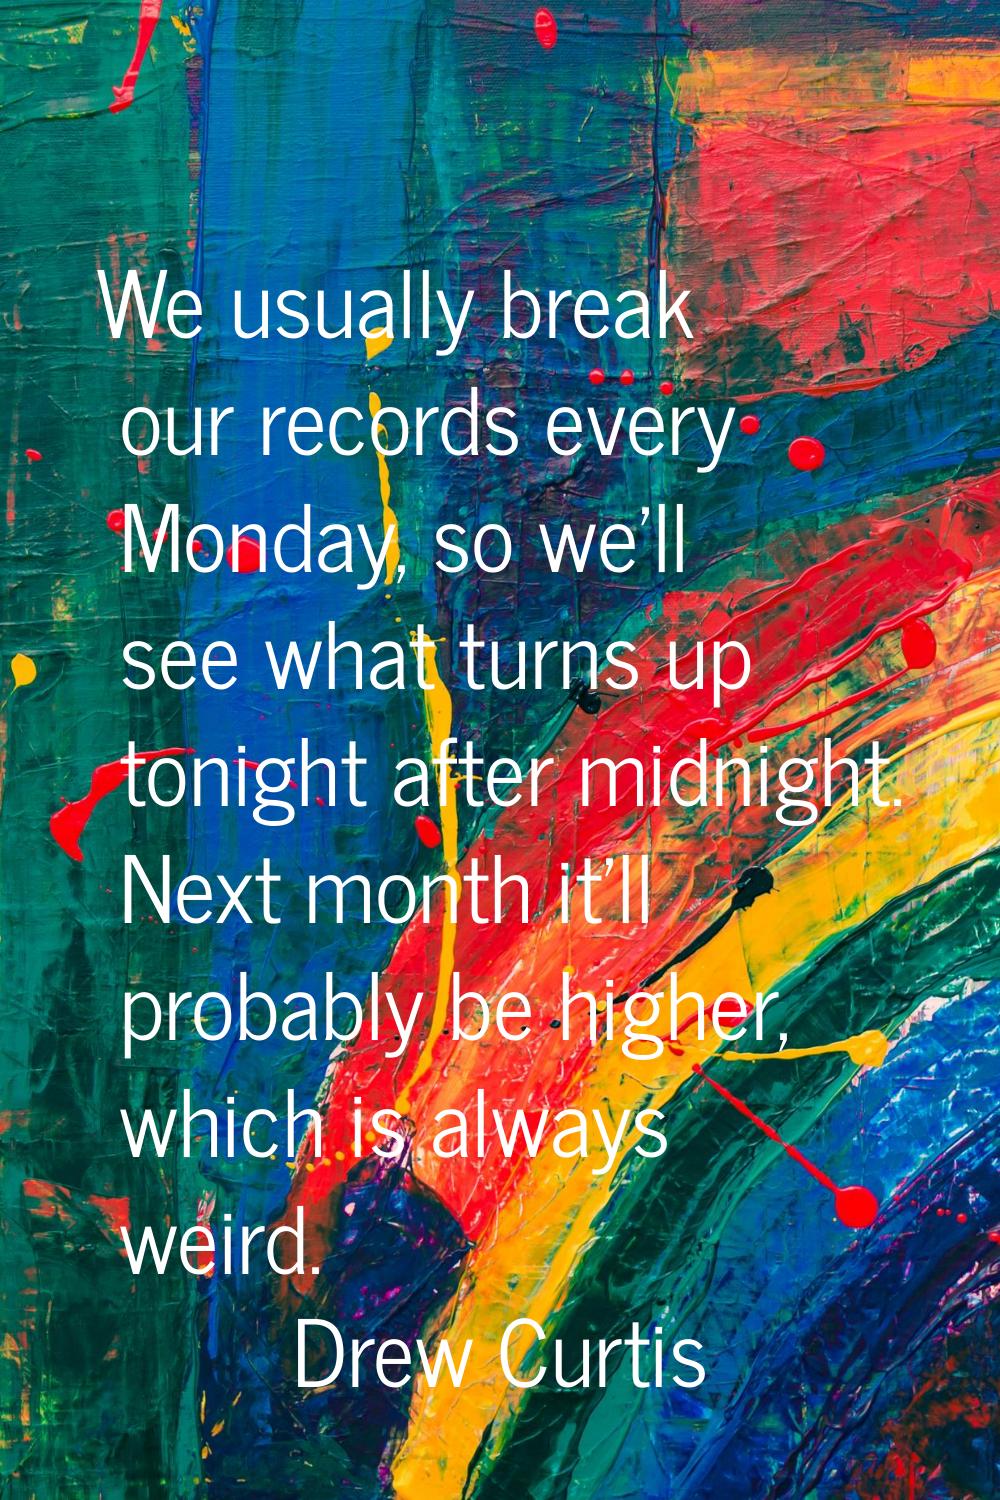 We usually break our records every Monday, so we'll see what turns up tonight after midnight. Next 